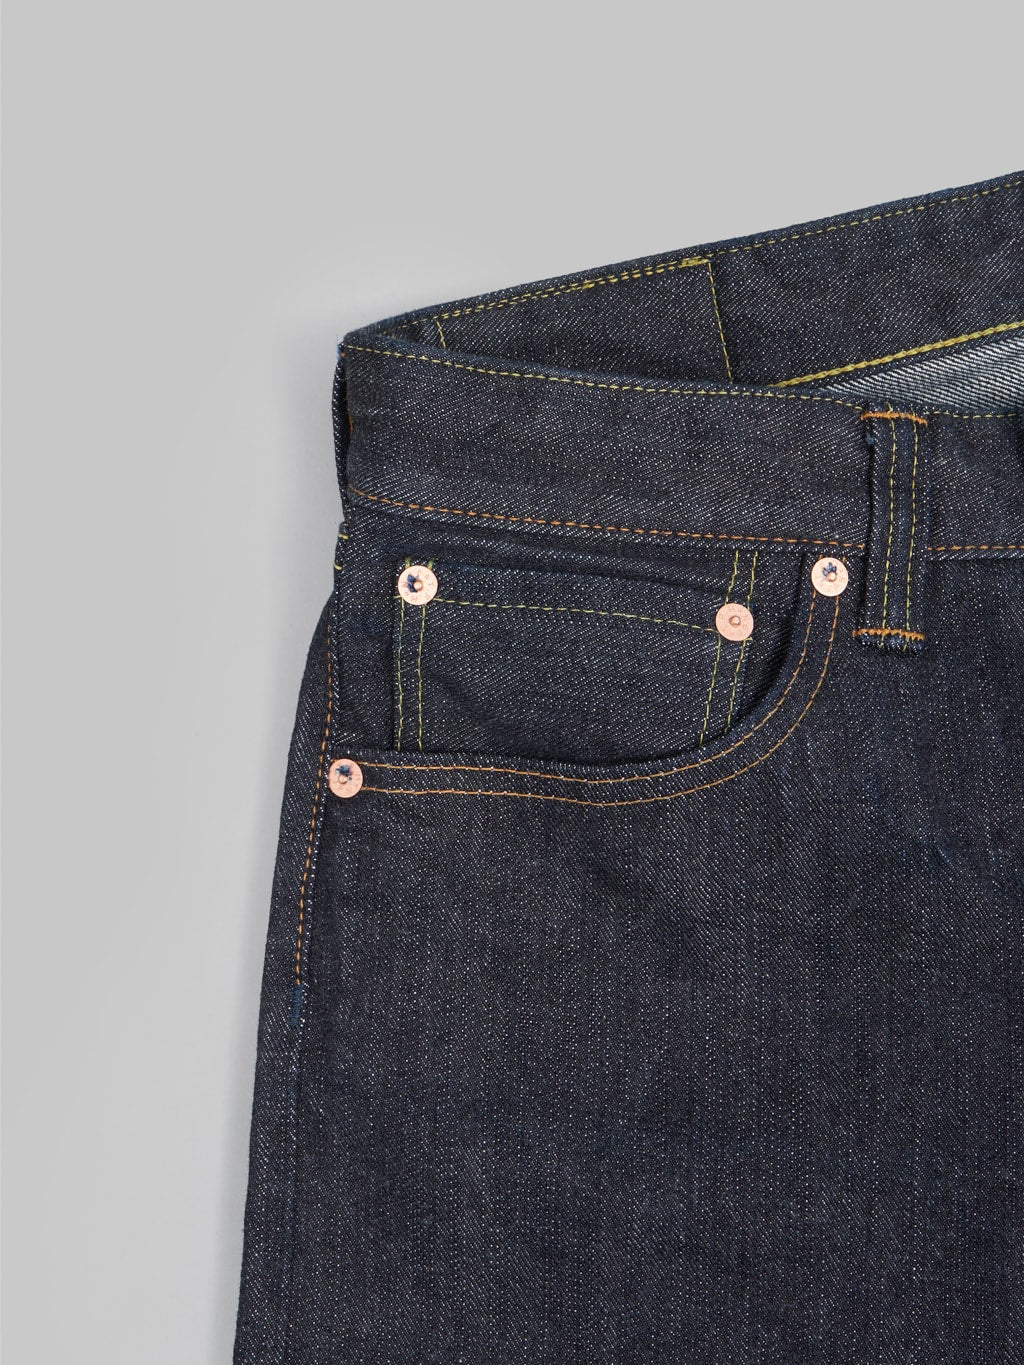 the flat head fn d111 wide straight selvedge denim jeans coin pocket